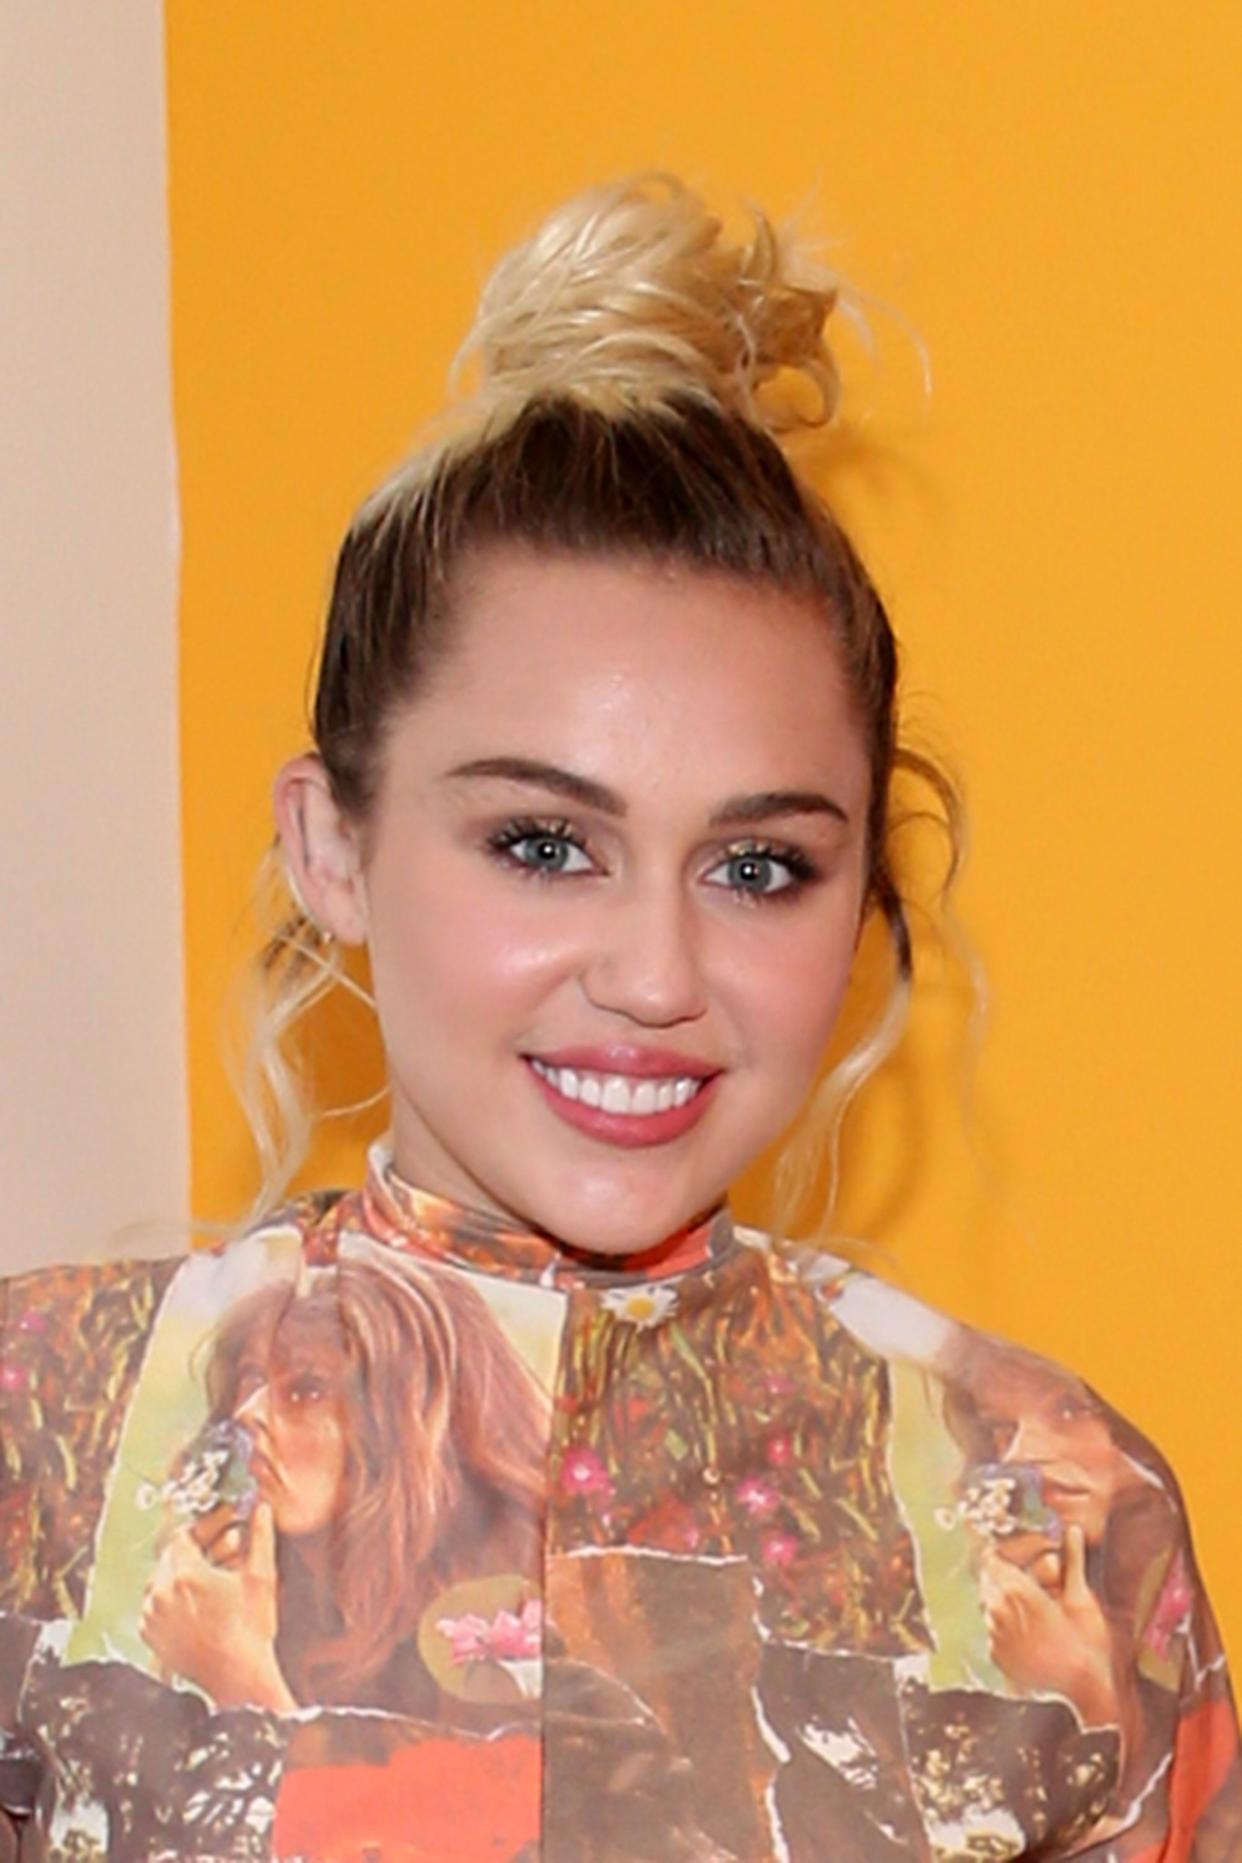 Miley Cyrus at an event in 2016. (Photo: Getty Images)